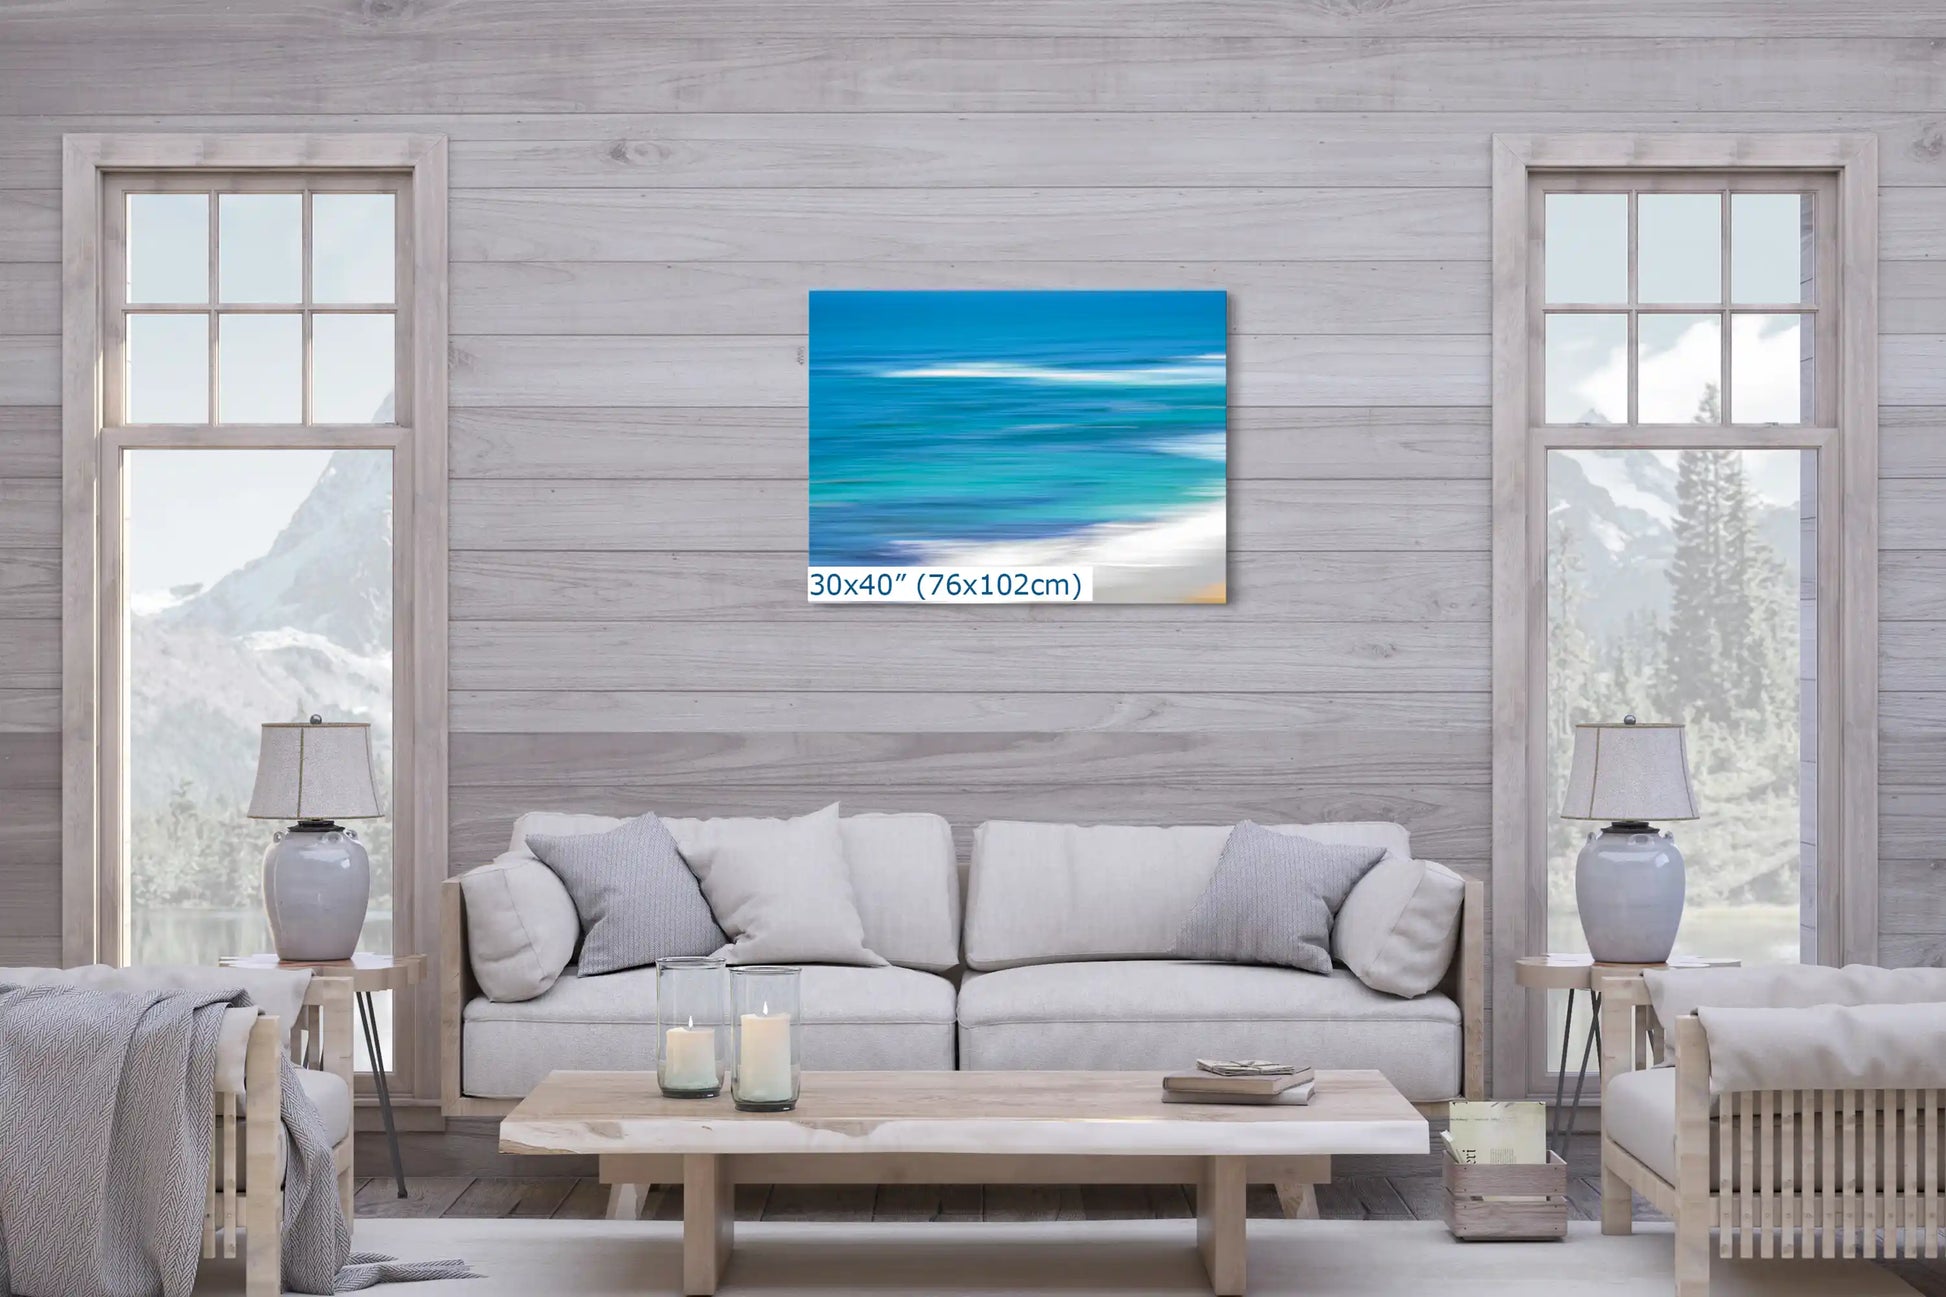 Blue Ocean abstract art in 30x40-inches over living room couch